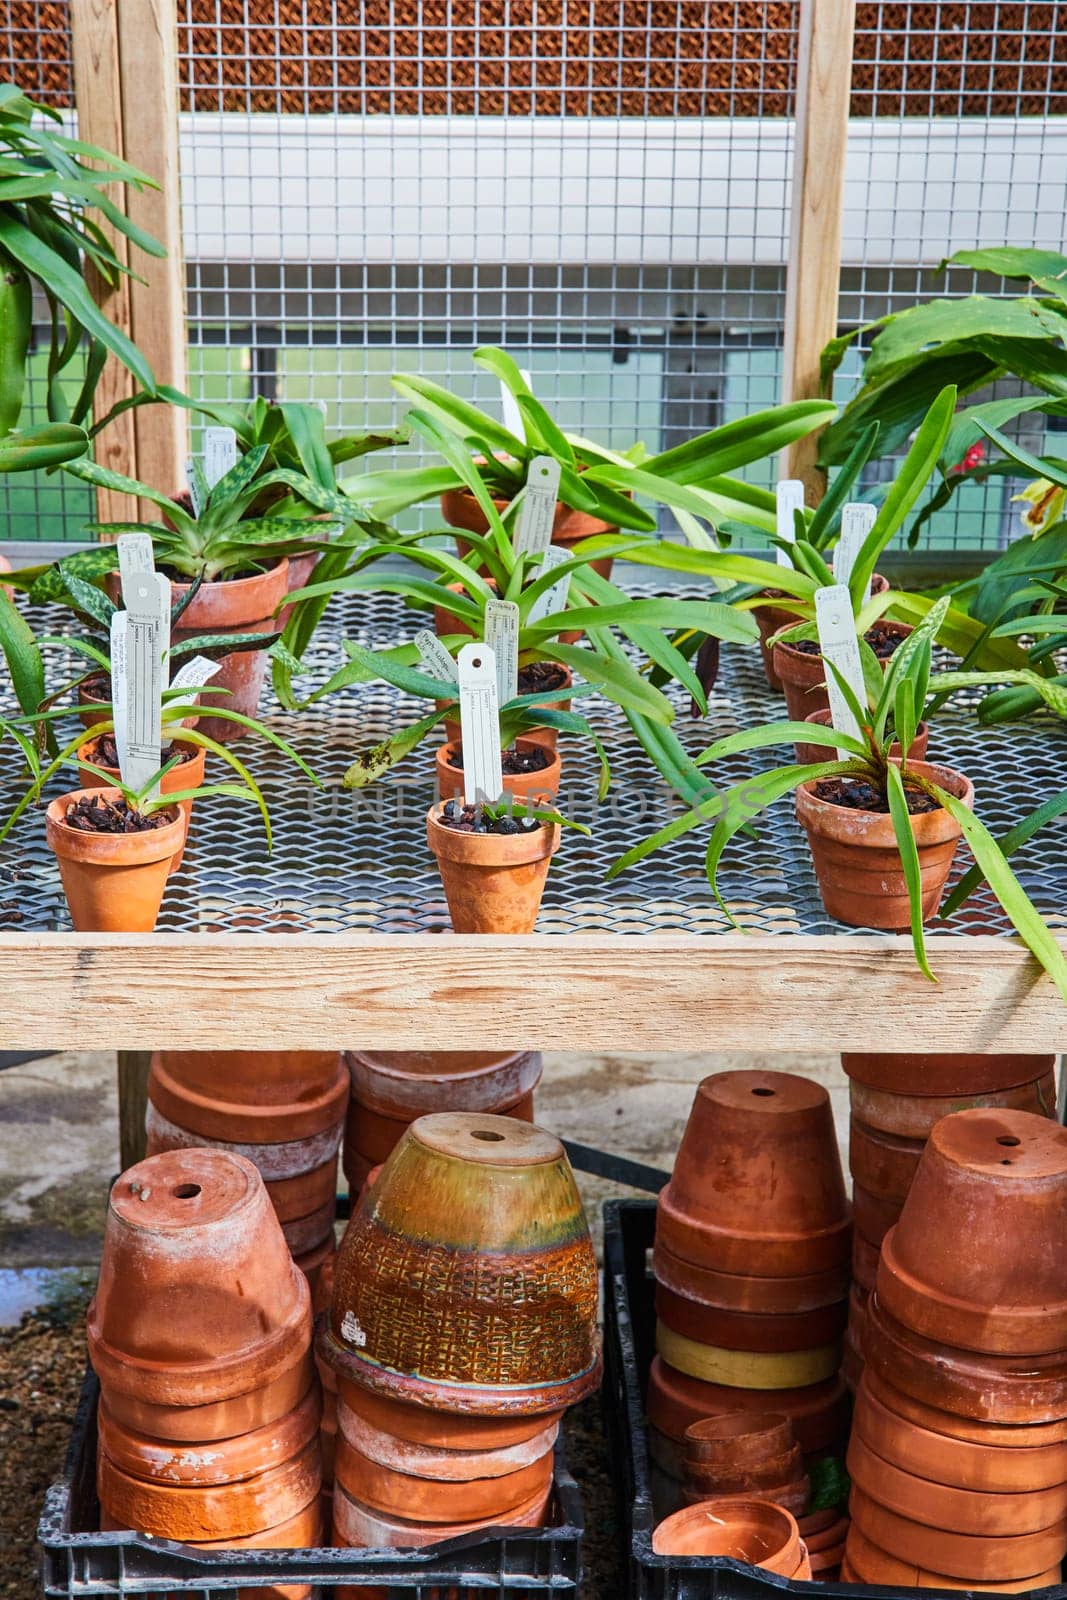 Greenhouse Orchids and Terracotta Pots on Shelves by njproductions